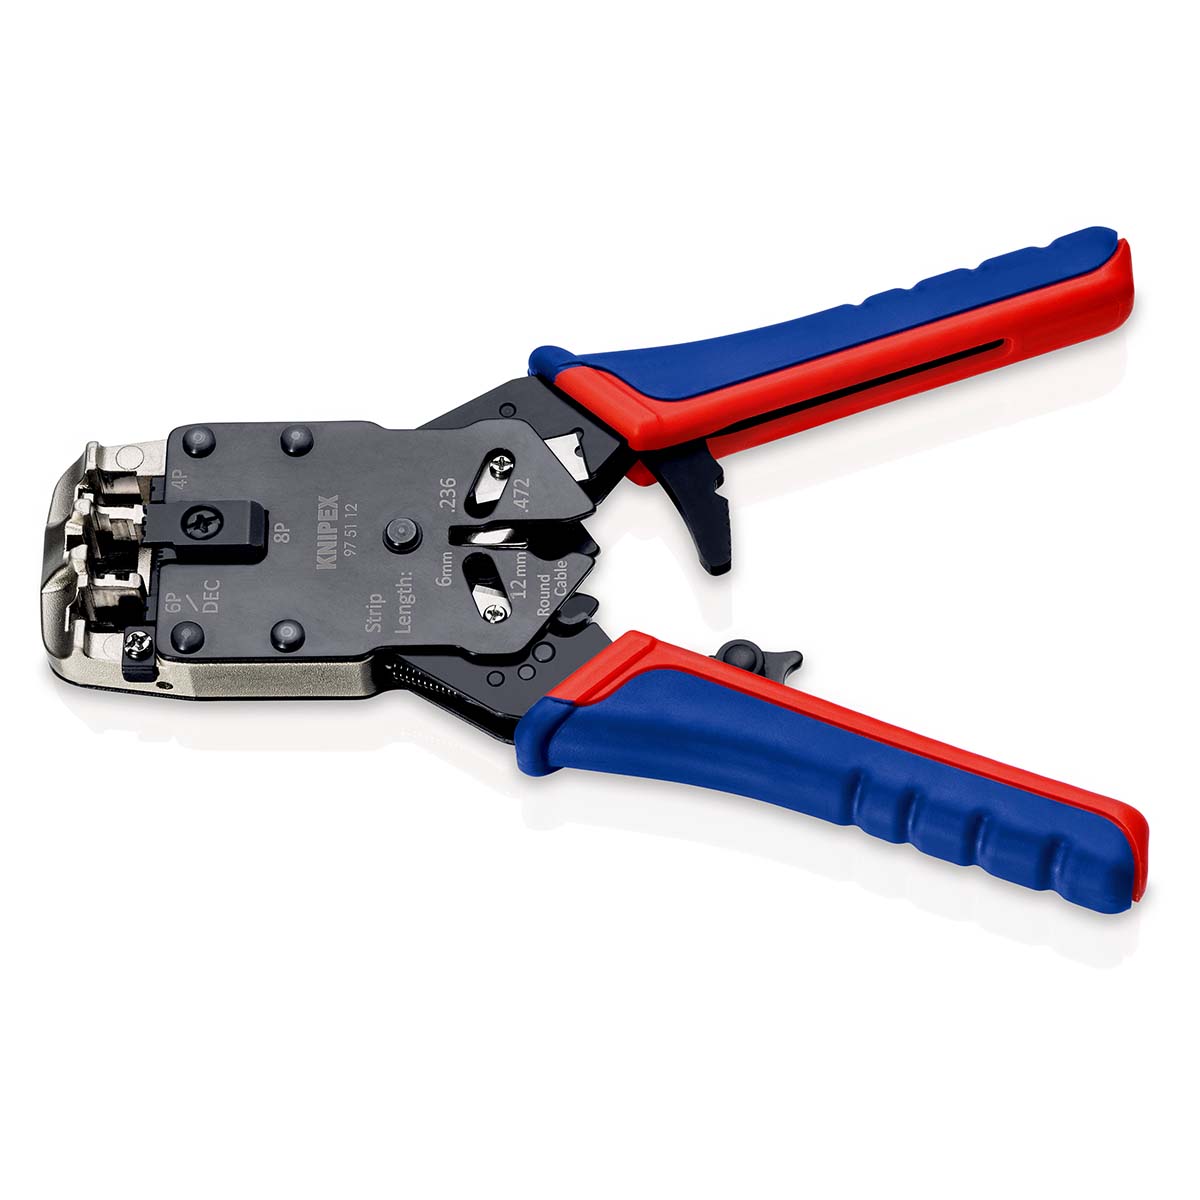 Crimp lever pliers for Western plugs Western connector RJ10 (4-pin 